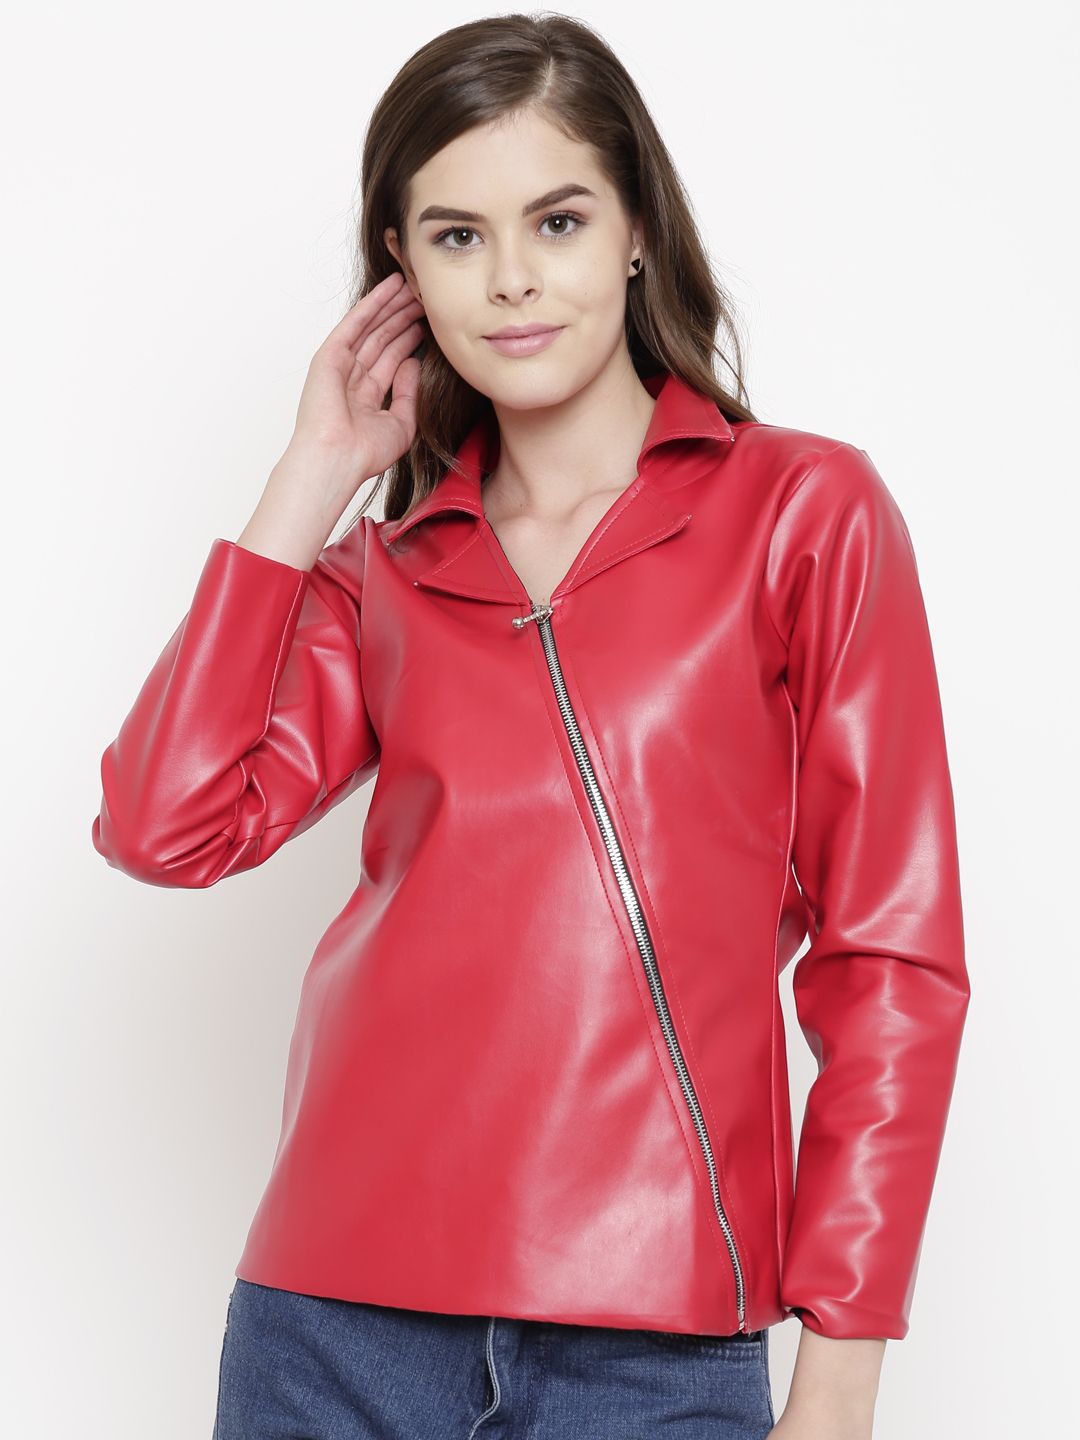 Belle Fille Women Red Solid Asymmetric Closure Leather Jacket Price in India